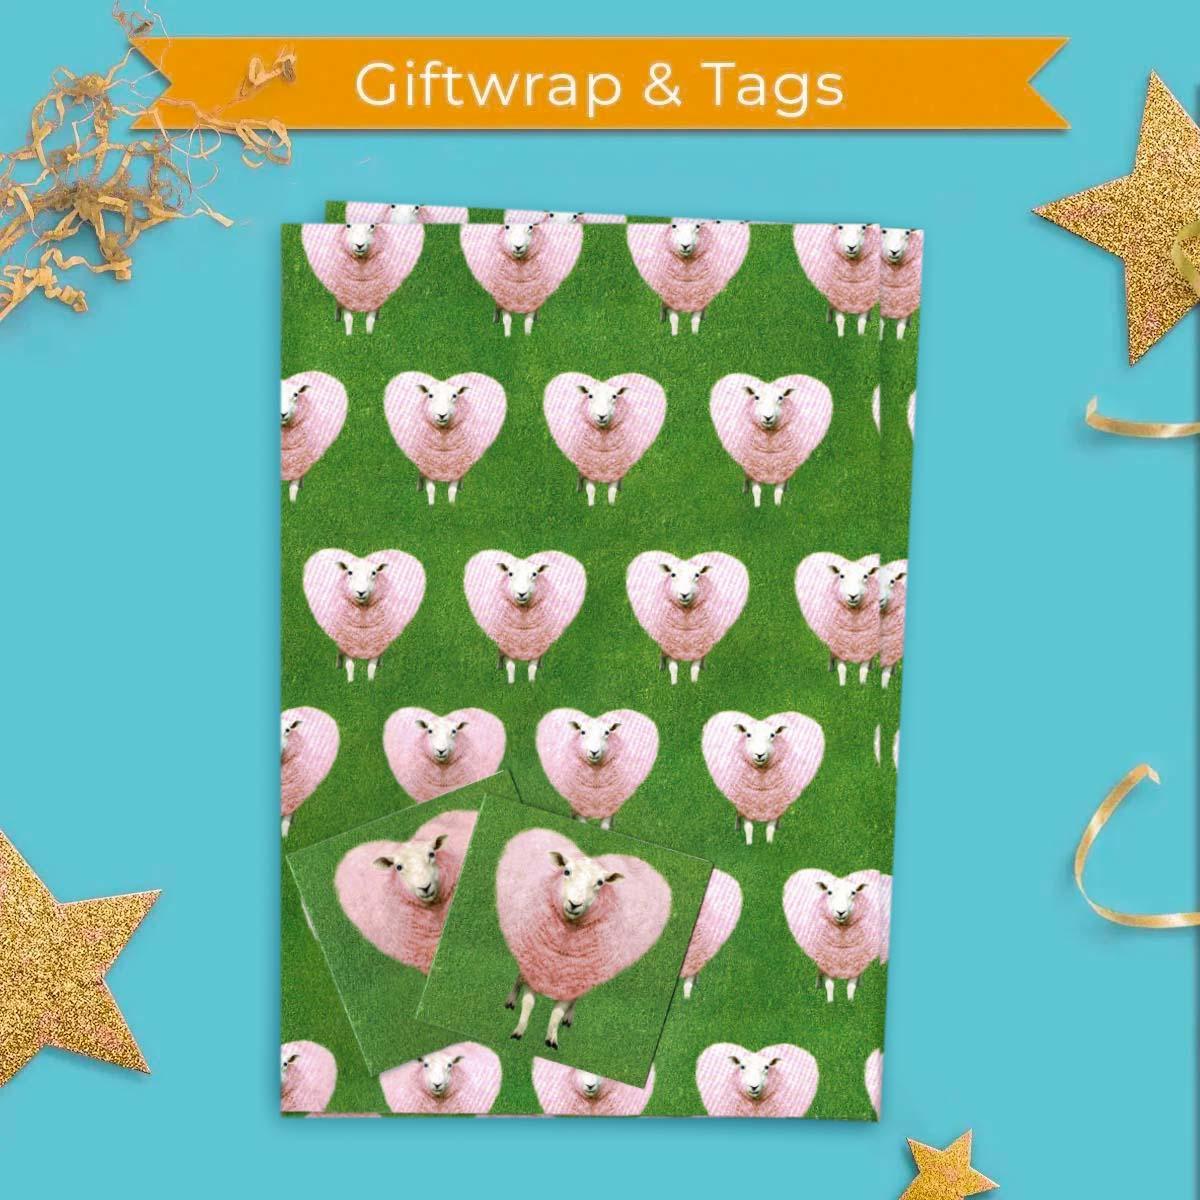 Giftwrap - Pink Sheep Front Image